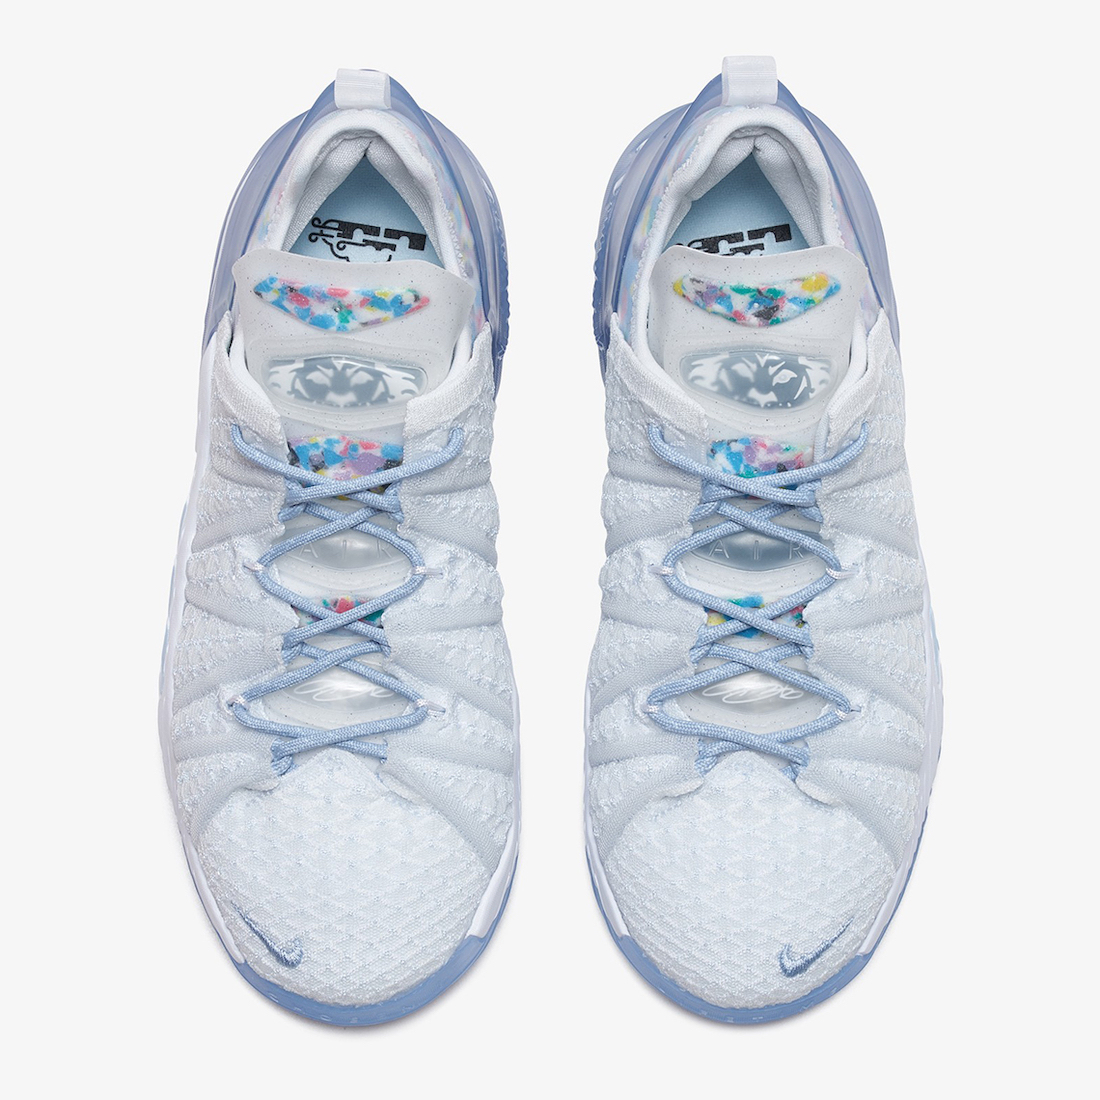 Nike LeBron 18 NRG GS Blue Tint White Clear CT4677-400 Release Date